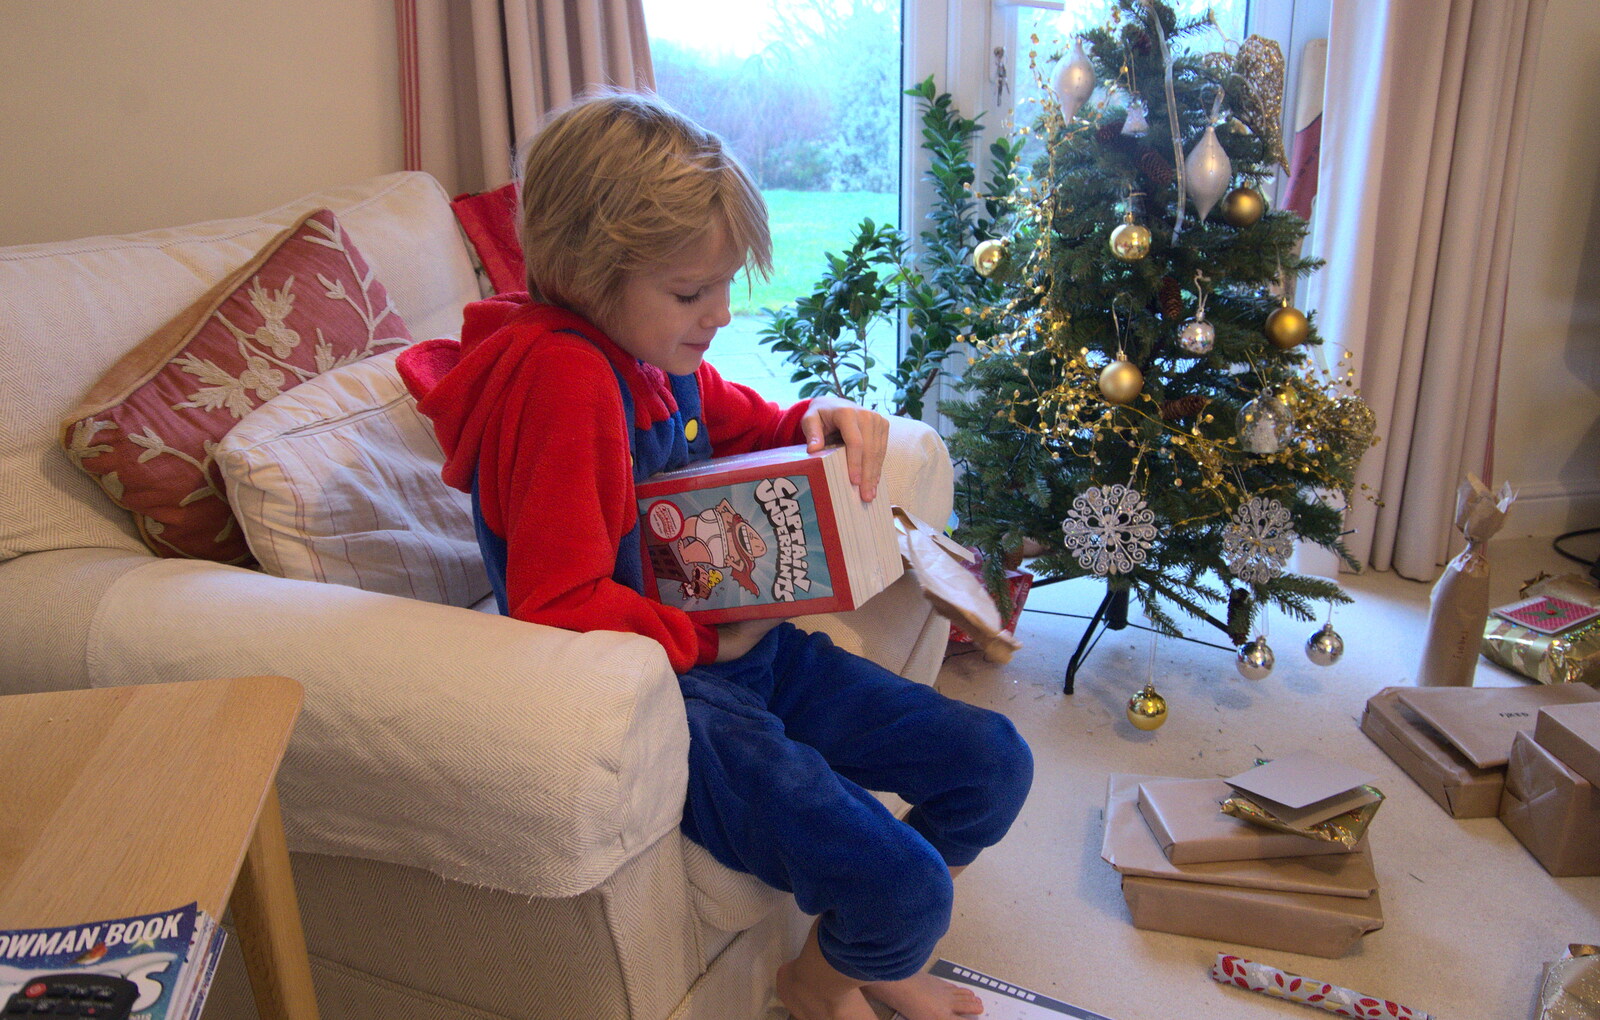 Harry's got a whole set of Captain Underpants from Christmas at Grandma J's, Spreyton, Devon - 25th December 2018